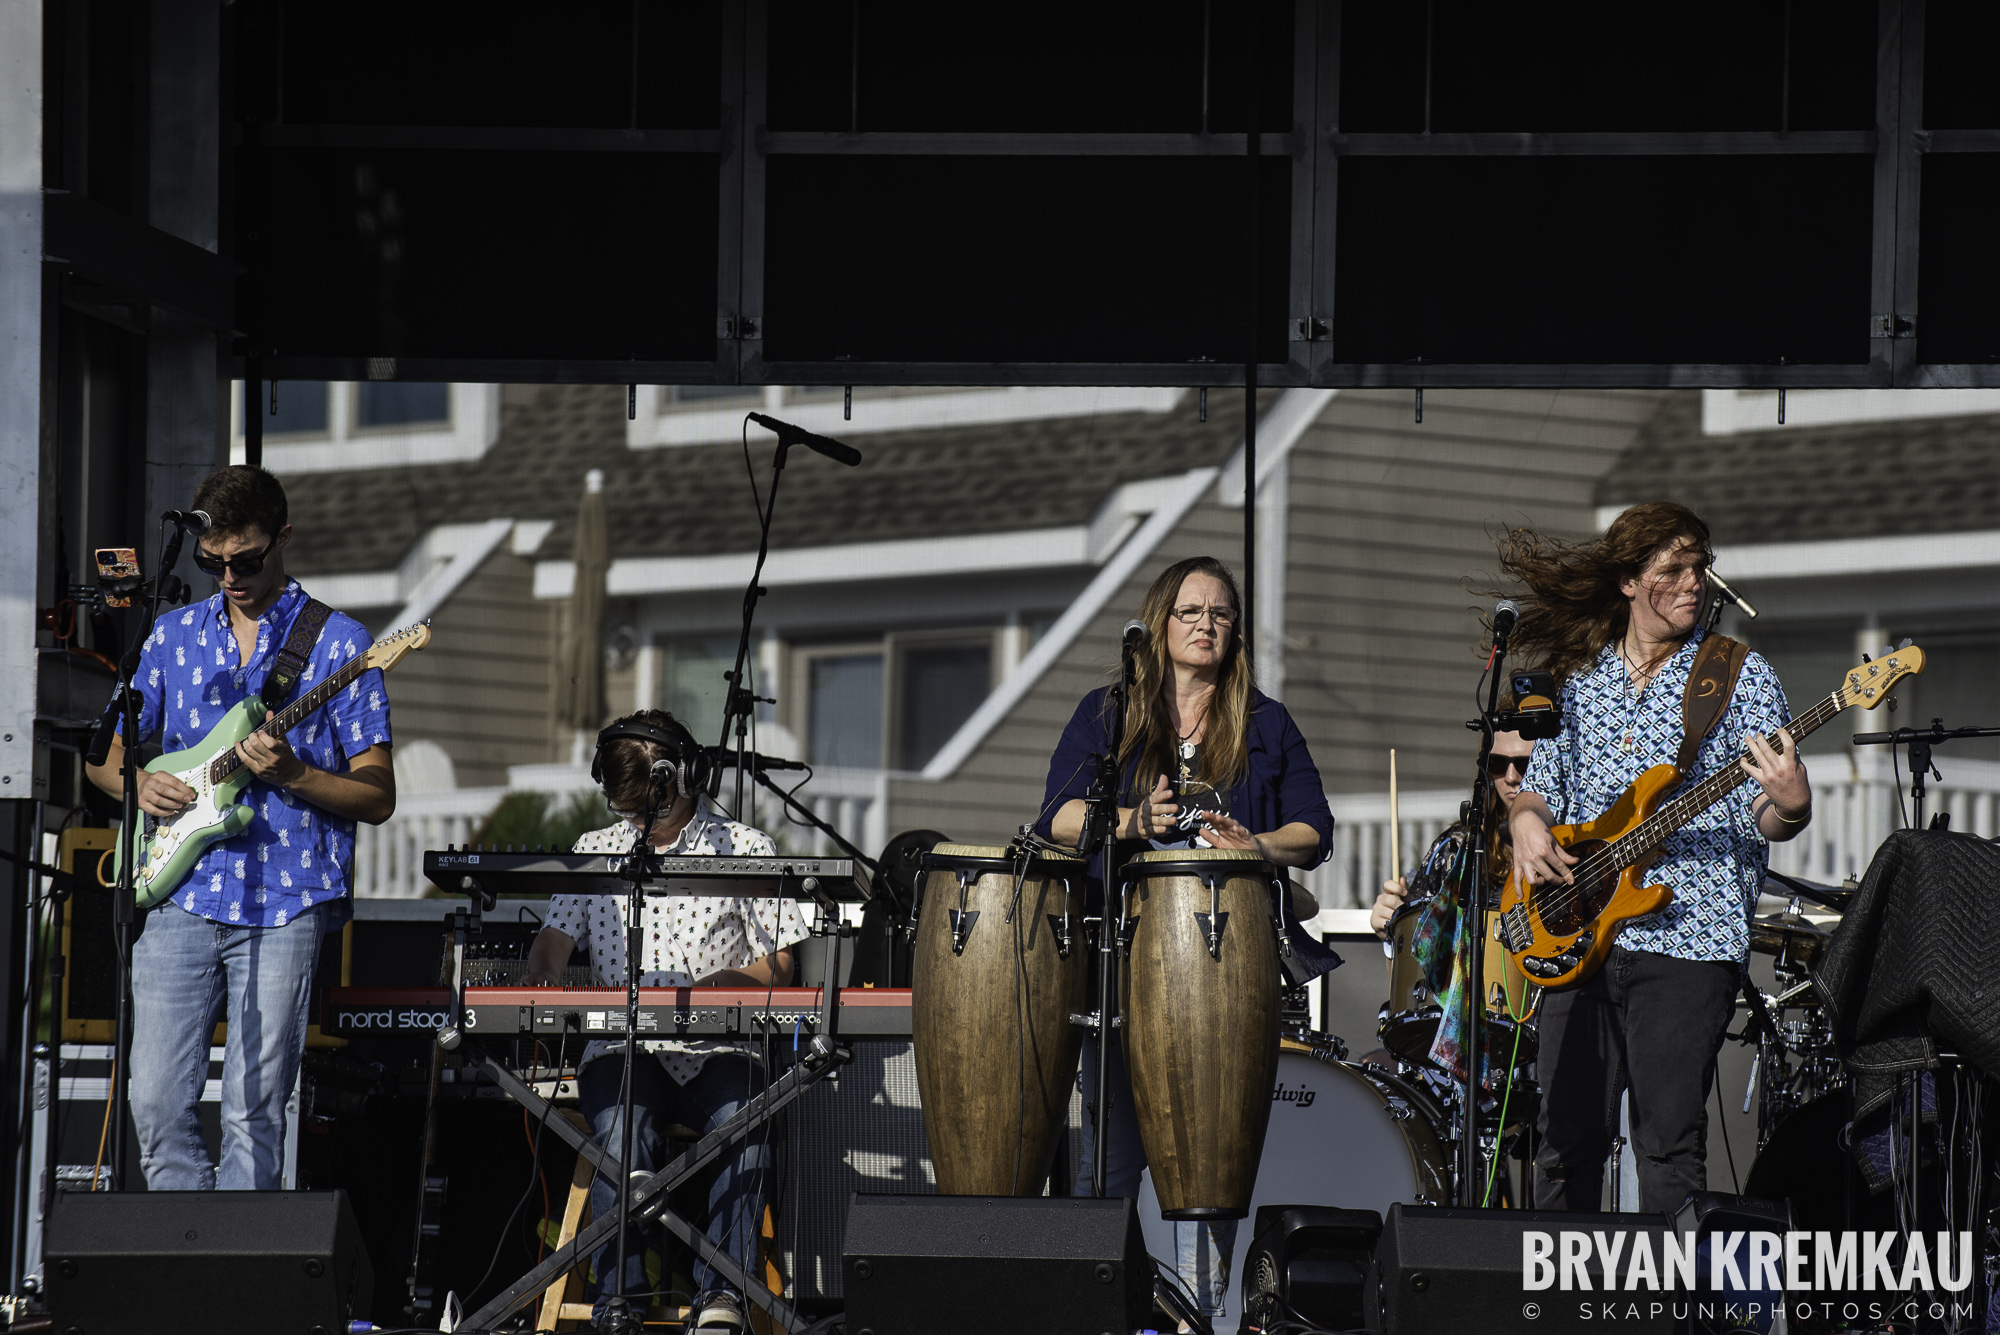 Melody Trucks & The Fitzkee Brothers @ Rocking The Docks, Lewes, DE - 07.26.23